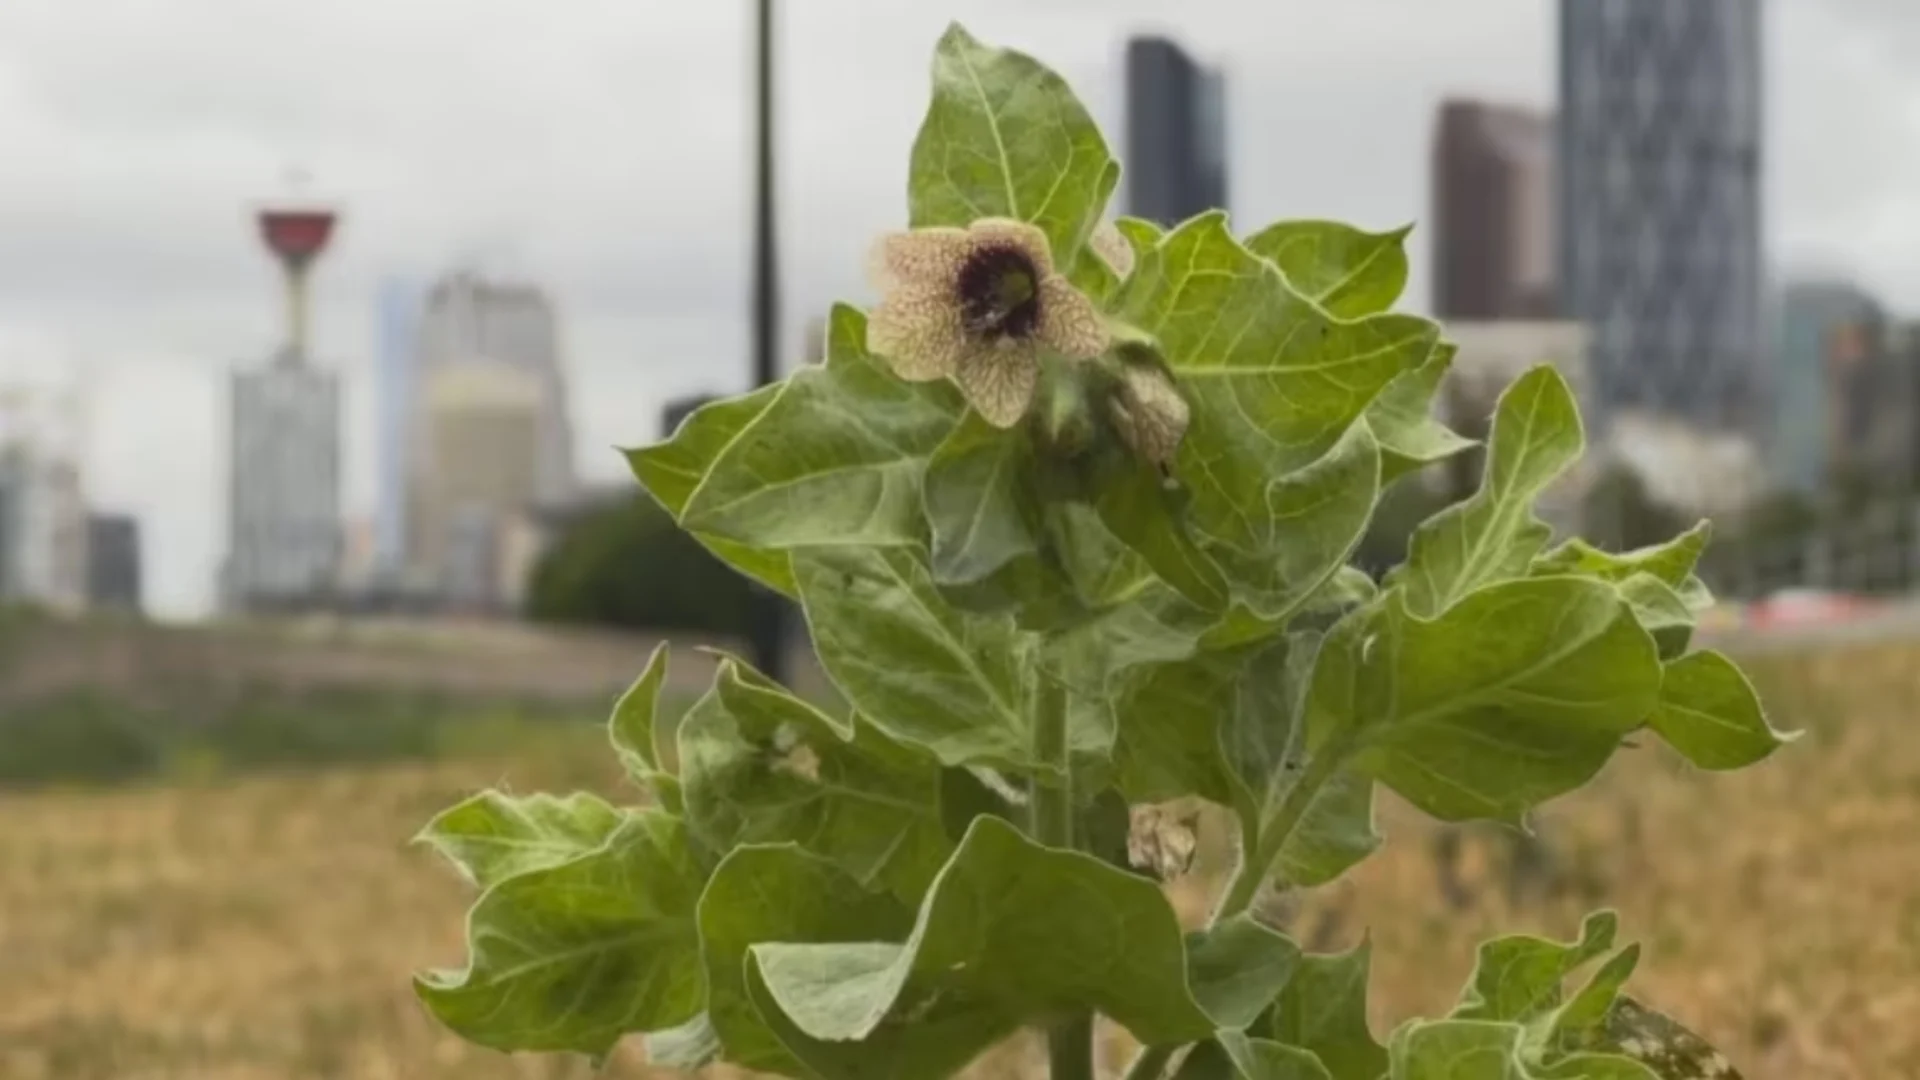 Beware the Black Henbane, a toxic plant that's appearing in Calgary